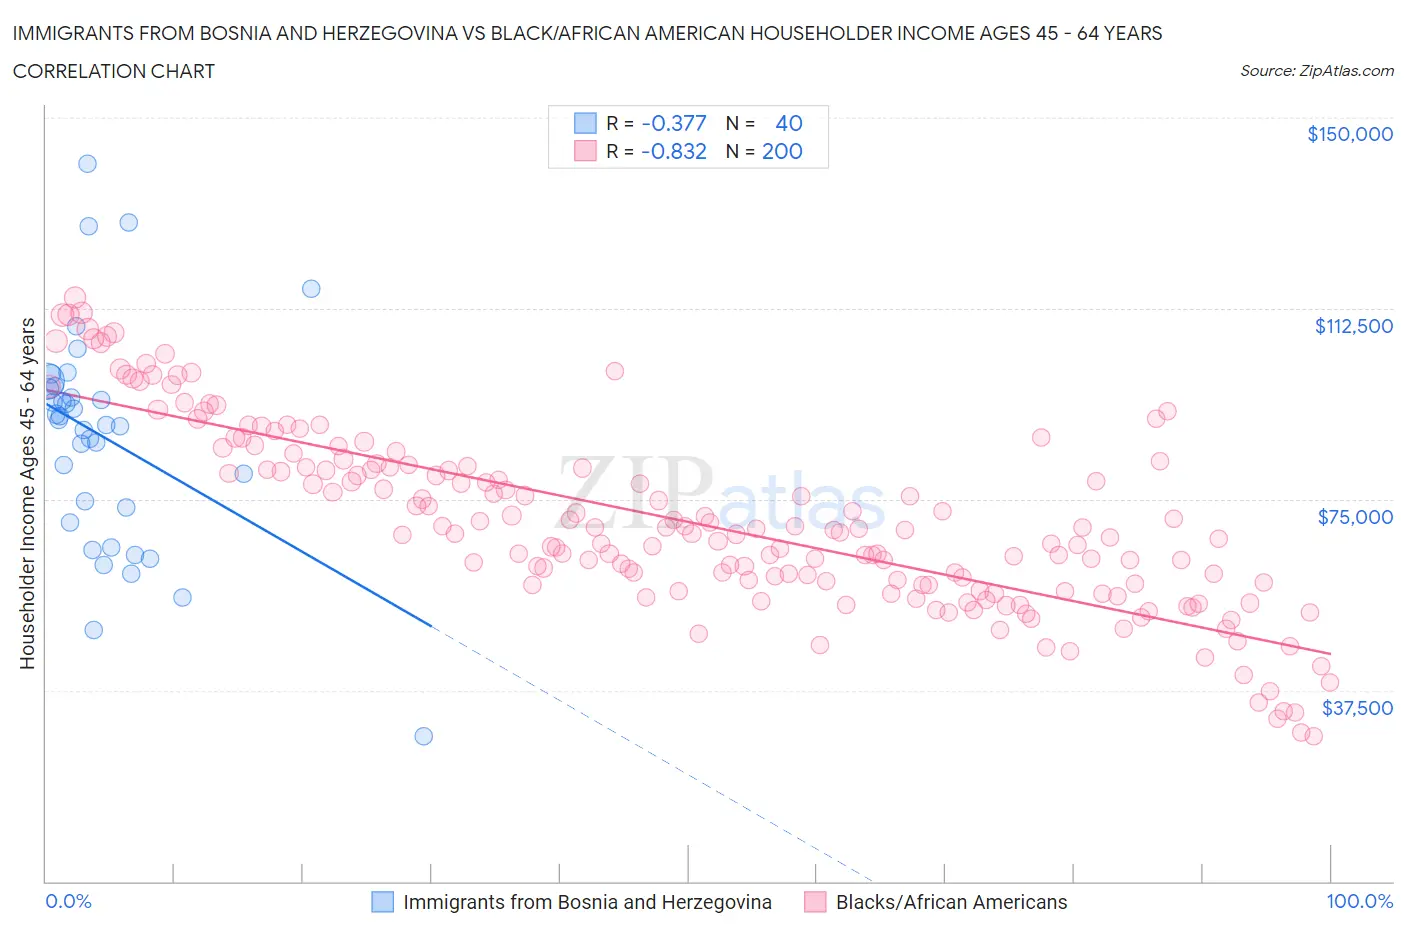 Immigrants from Bosnia and Herzegovina vs Black/African American Householder Income Ages 45 - 64 years